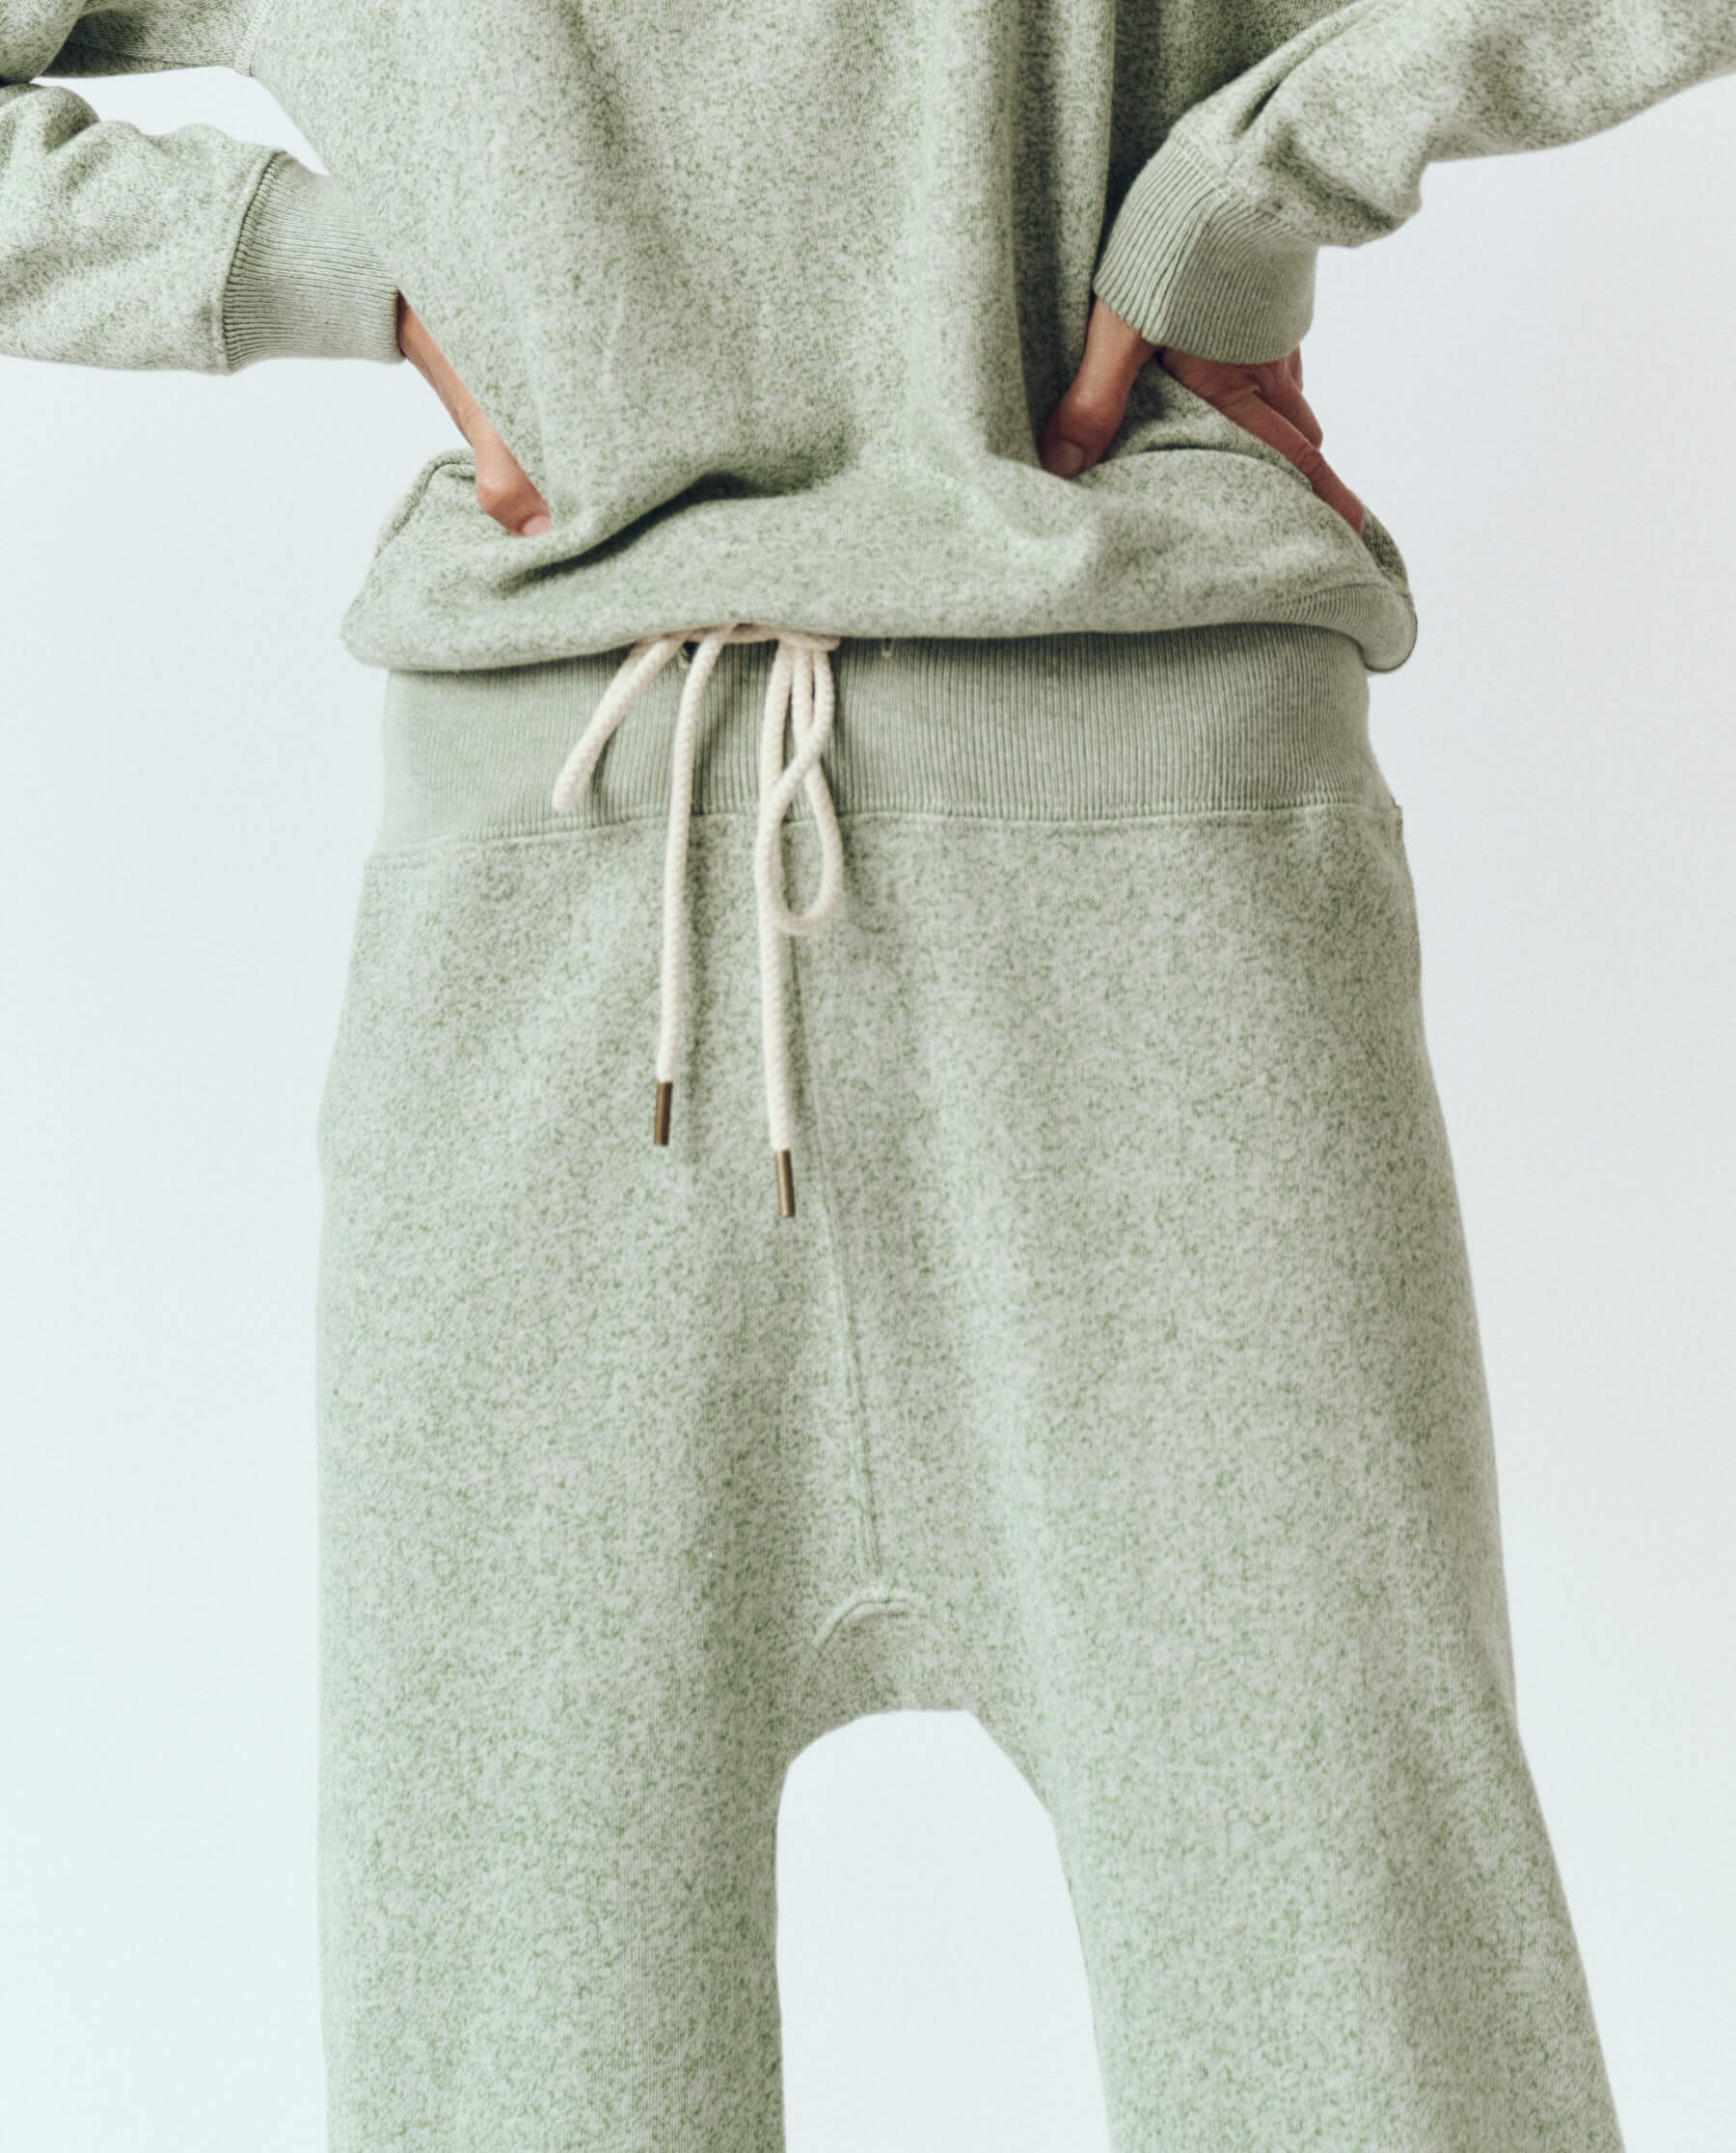 The Relay Sweatpant. -- Heathered Bright Pine SWEATPANTS THE GREAT. SP24 PRESSED CREASE + FLEECE